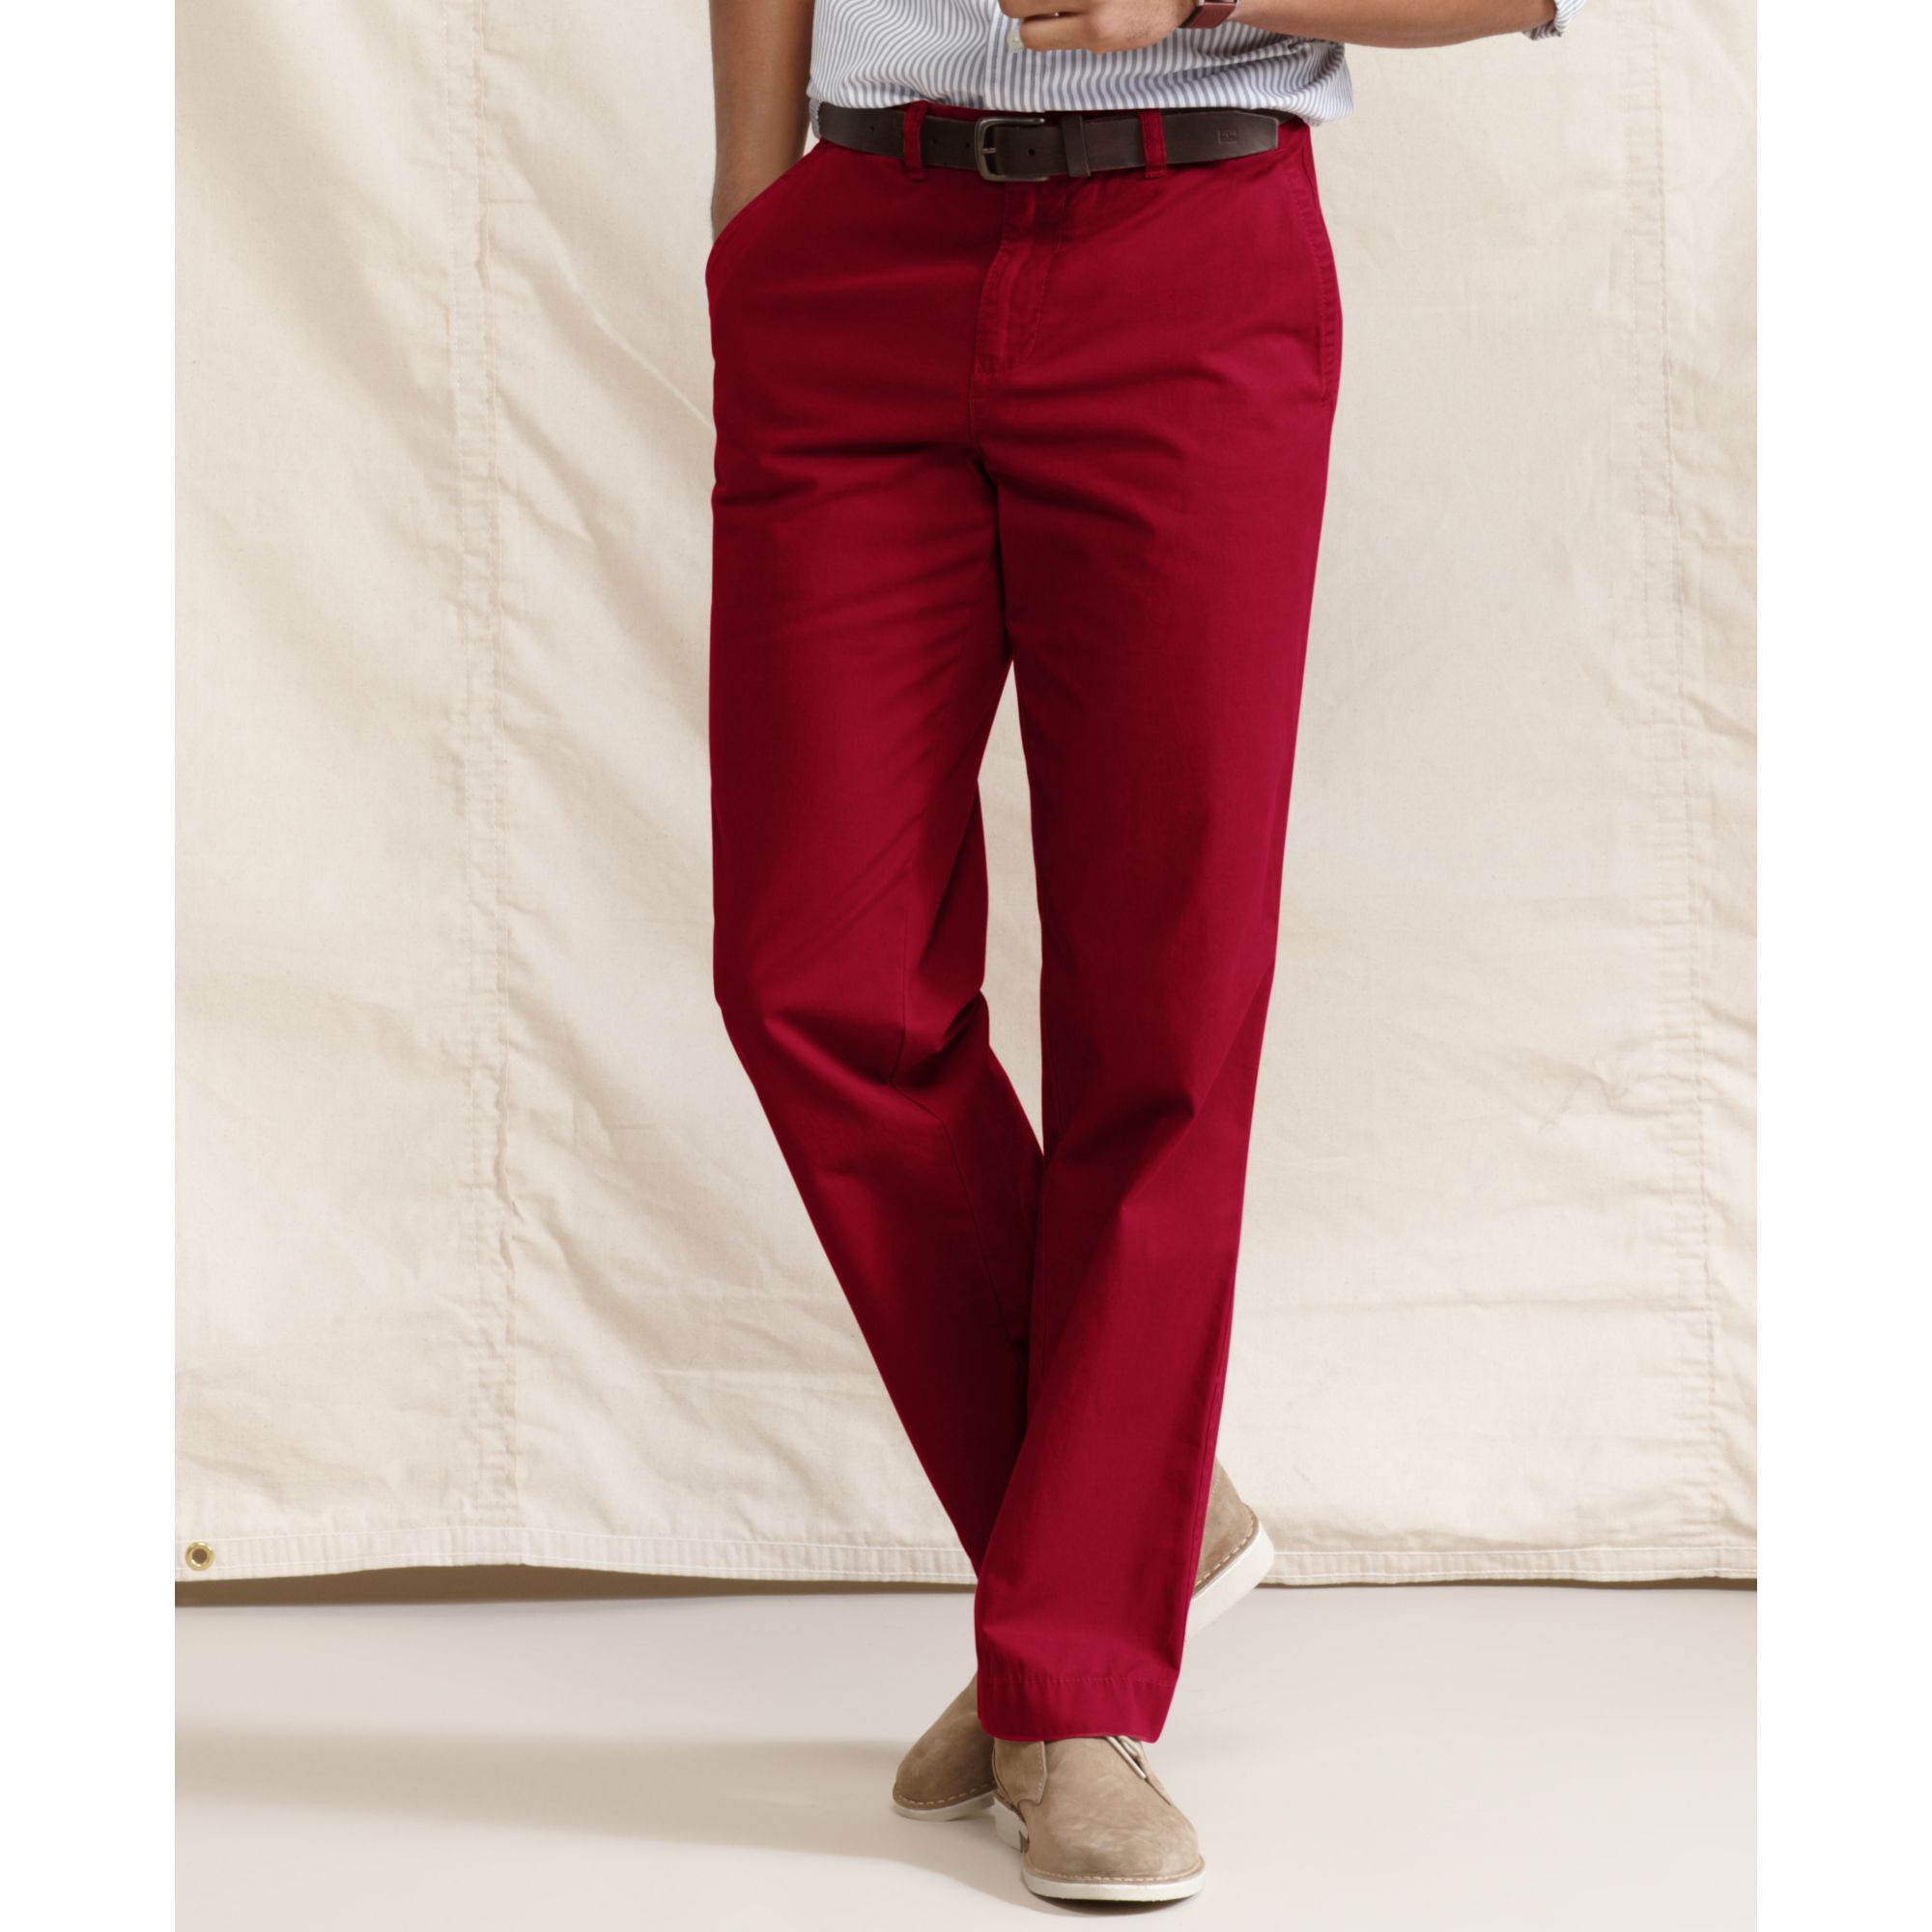 tommy hilfiger red pants off 75 